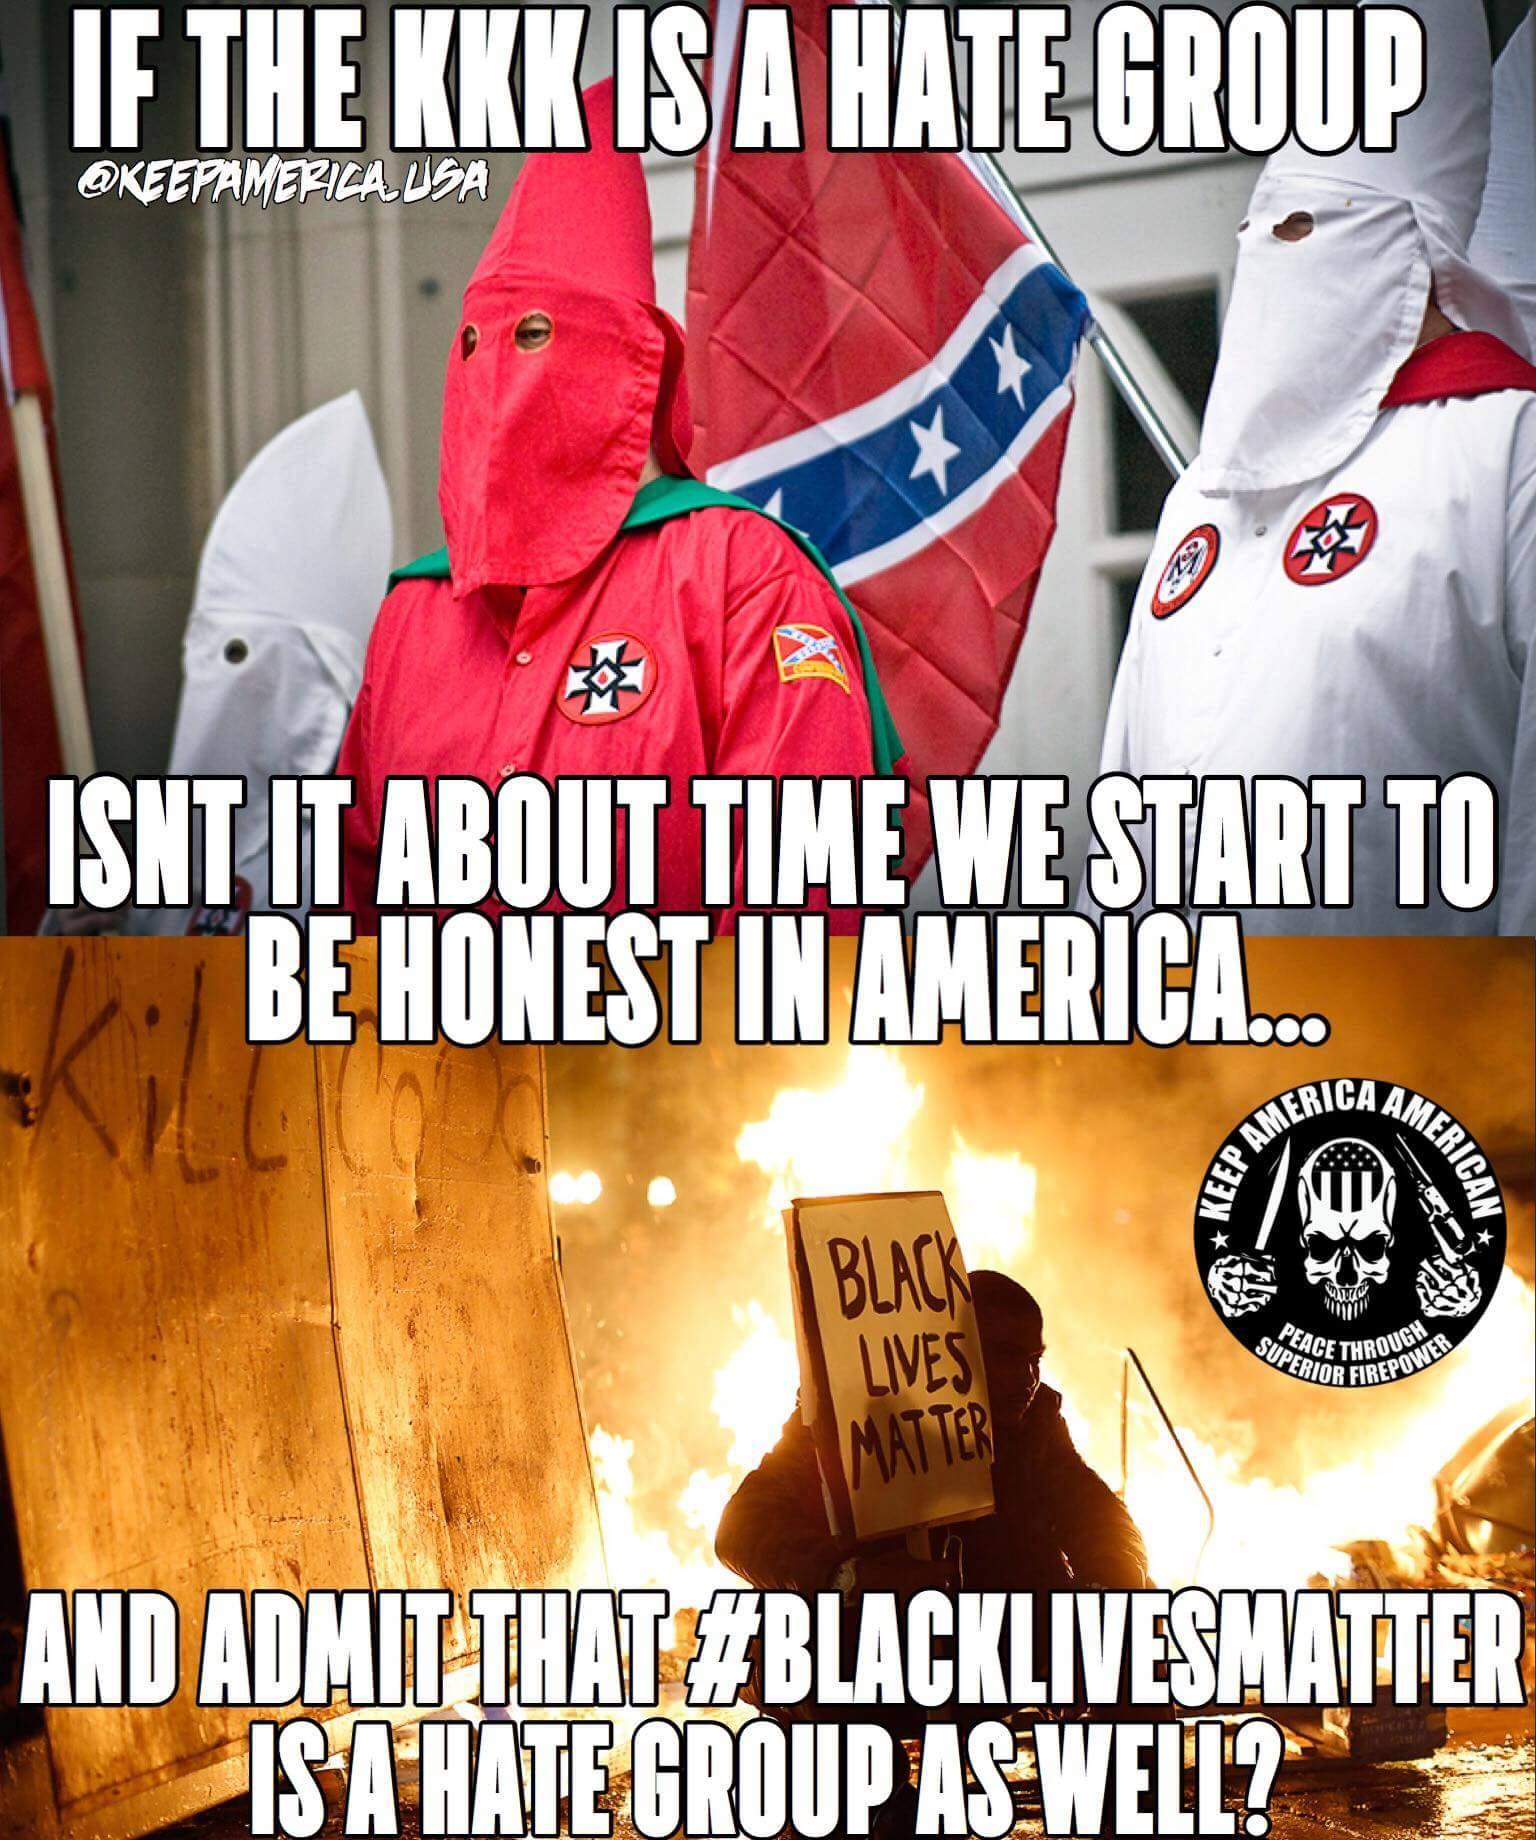 If the KKK is Racist, and it is